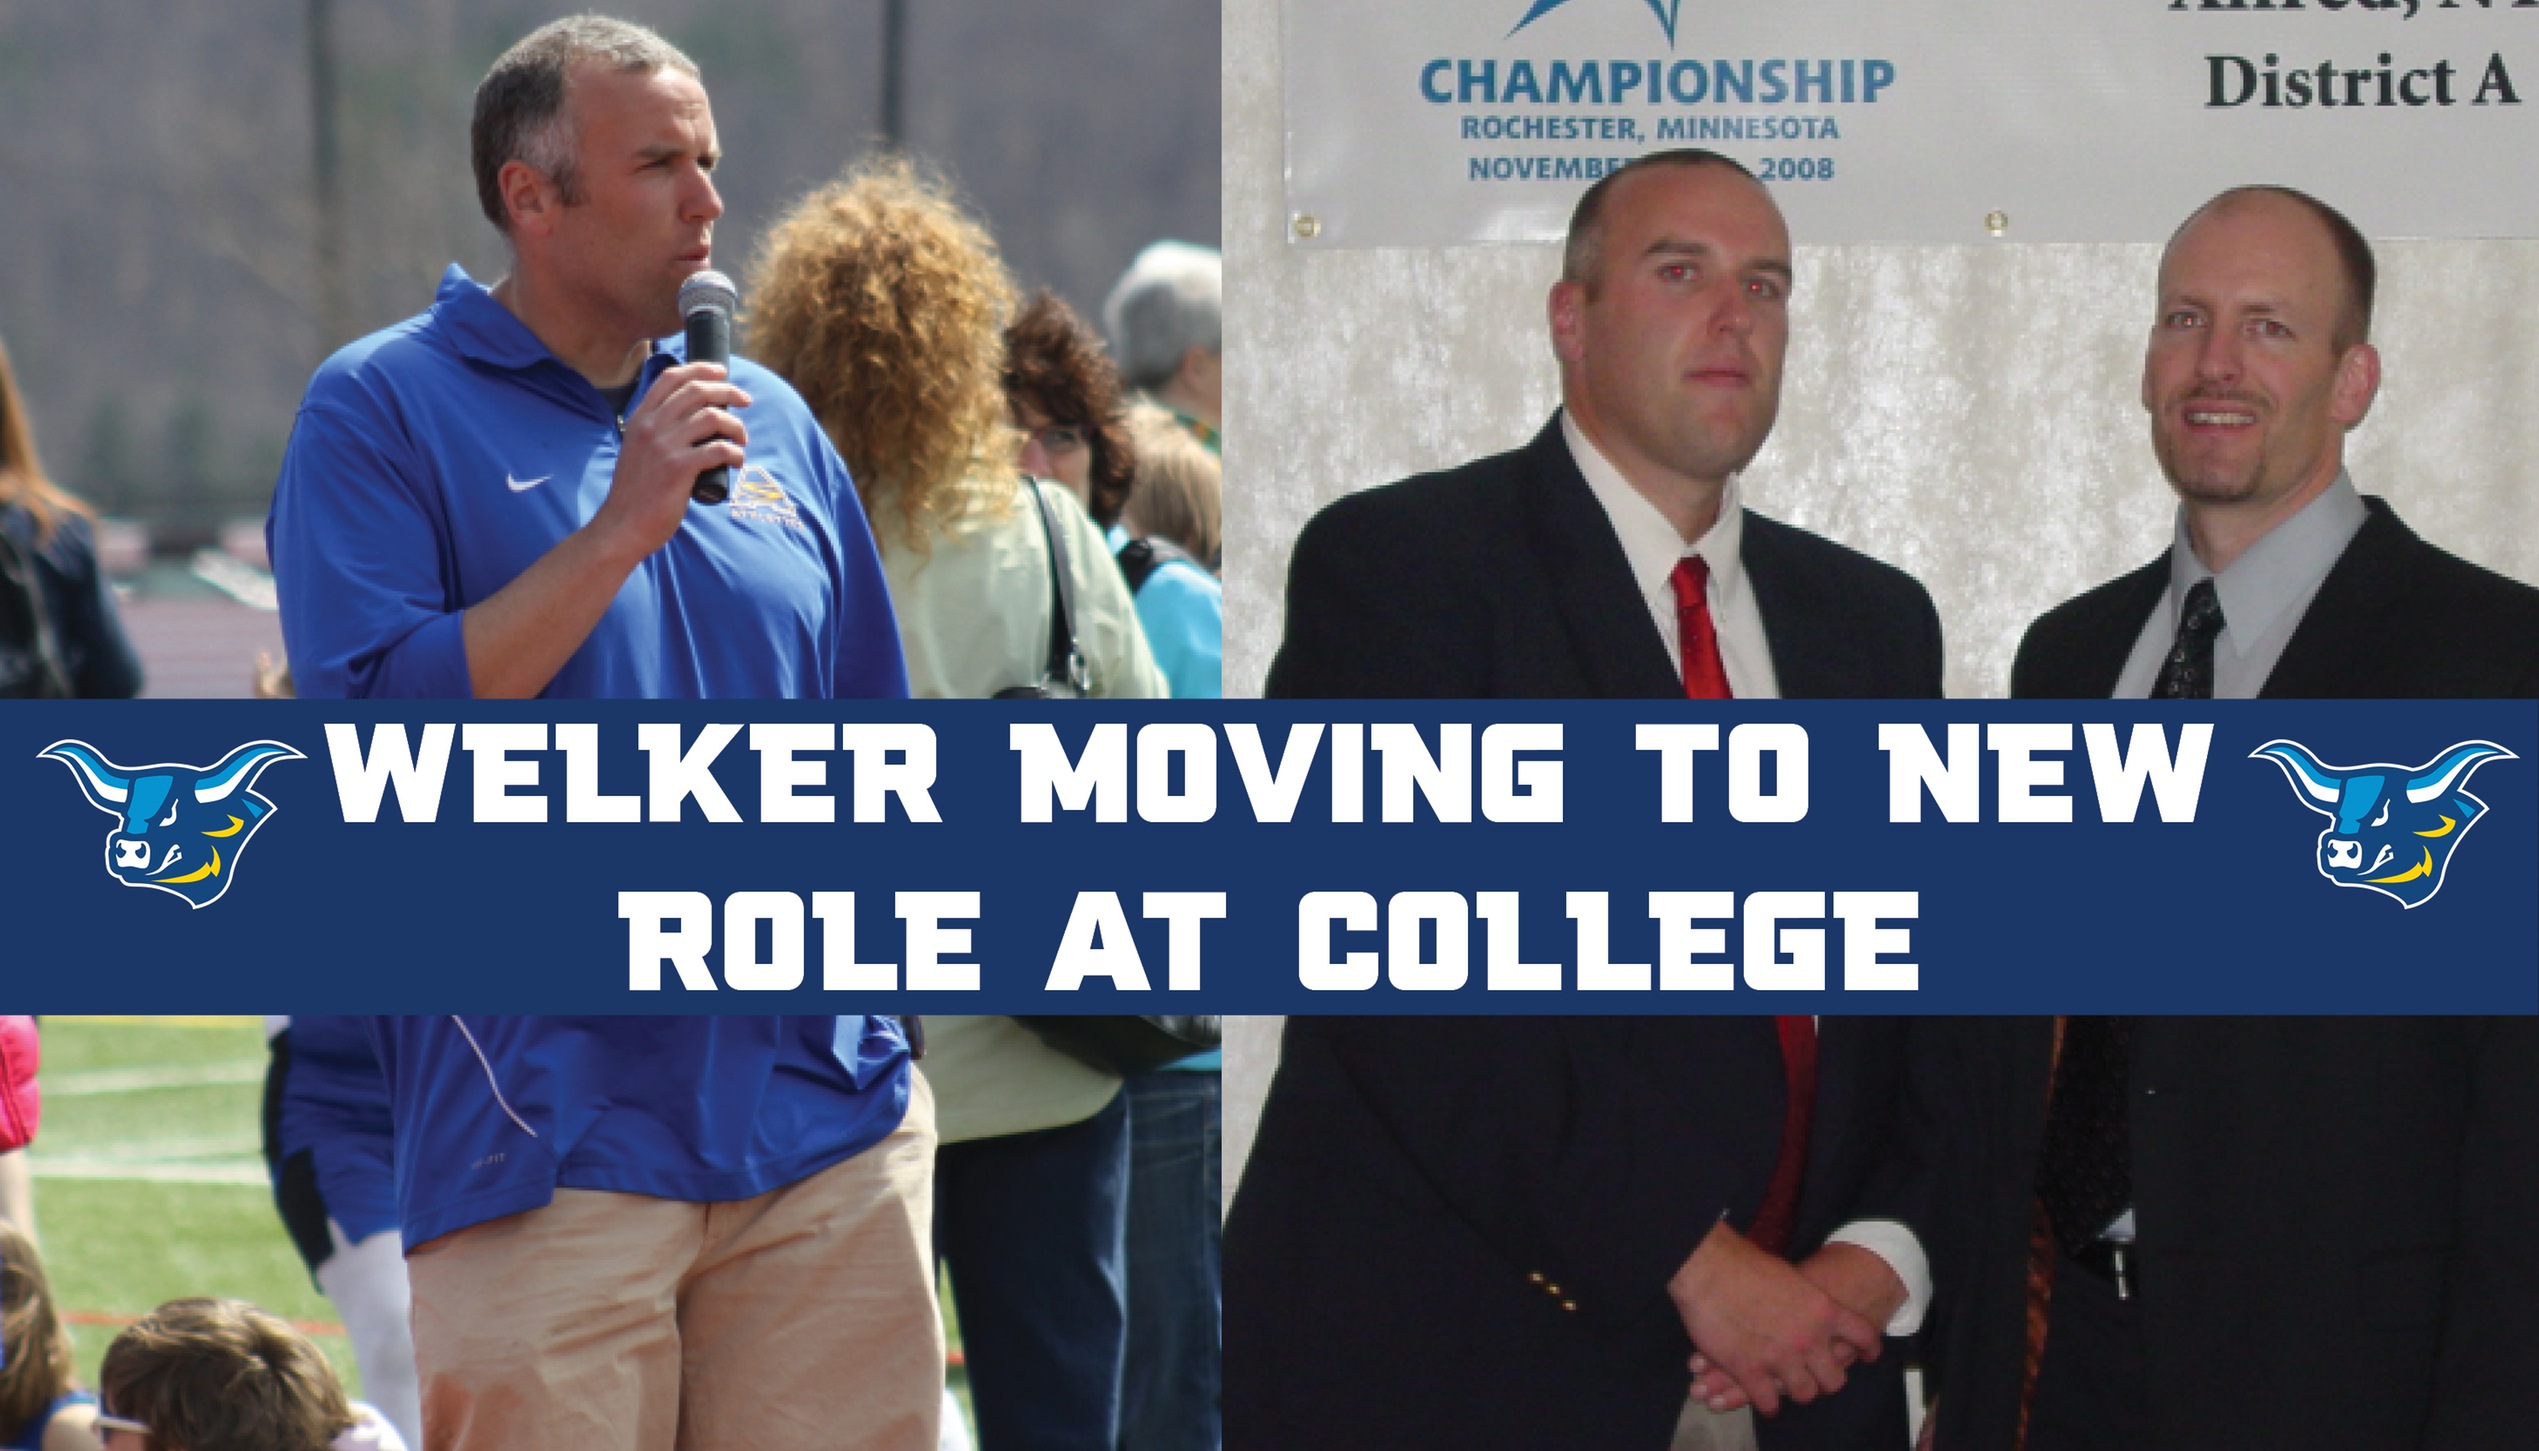 Pictures of Paul Welker - Welker Moving to New Role at College